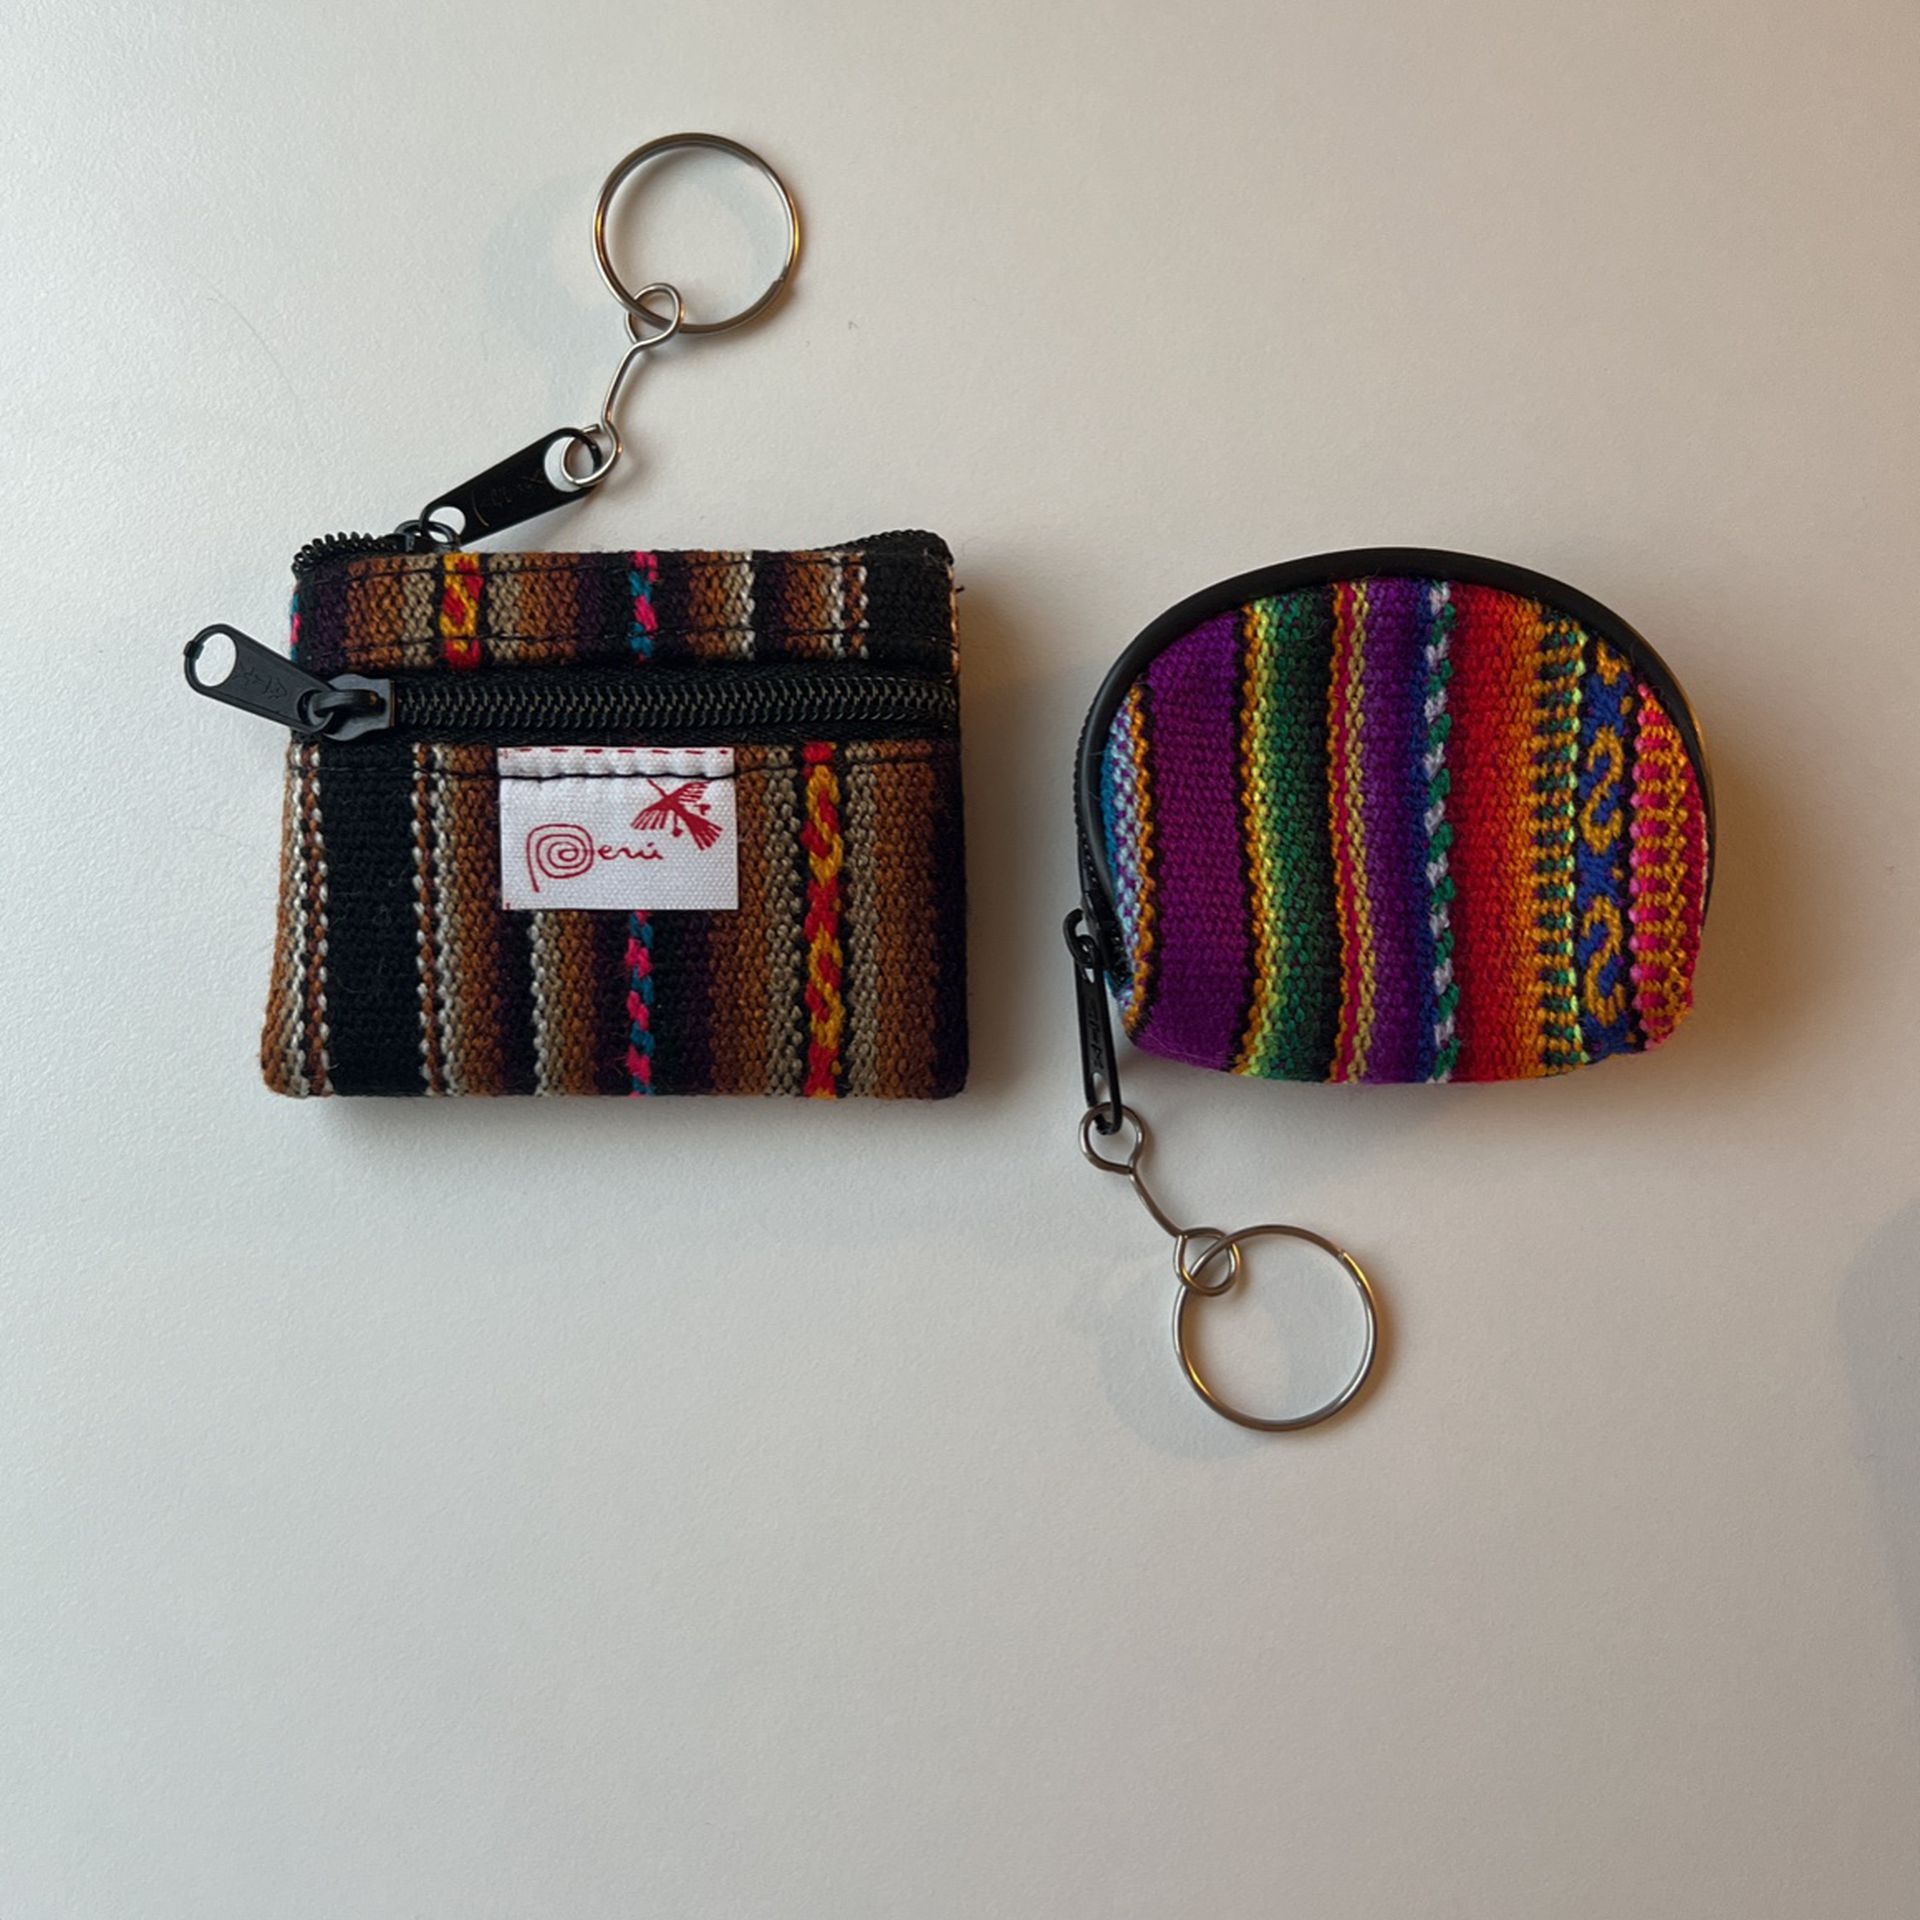 New - Small Coin Wallets from Peru